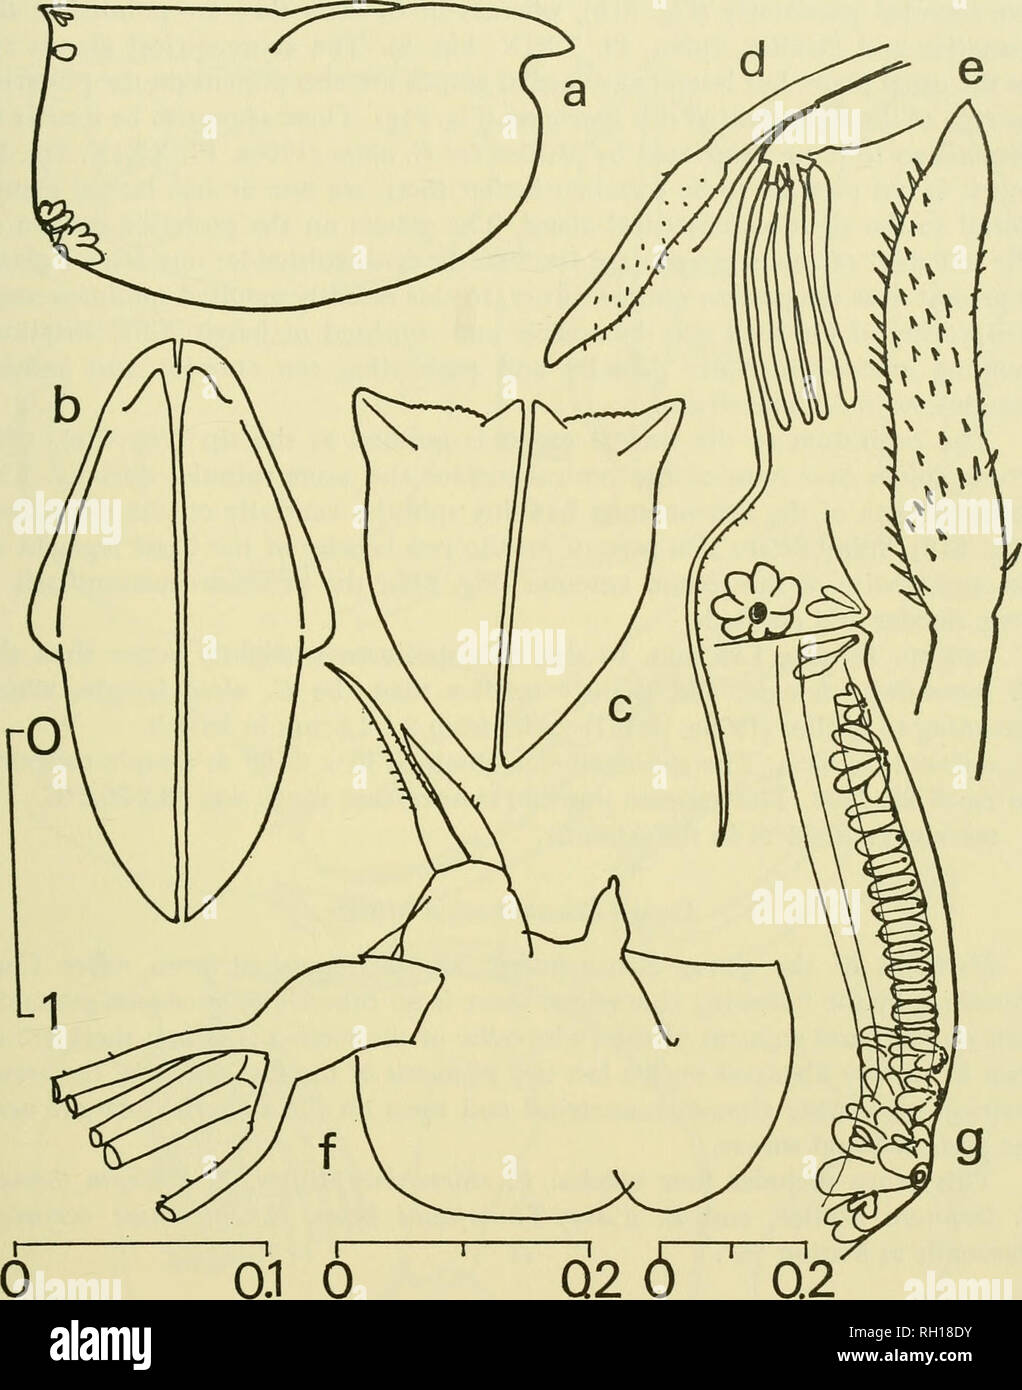 . Bulletin. Natural history; Natuurlijke historie. PELAGIC OSTRACODS OF THE SARGASSO SEA OFF BERMUDA 115. Figure 61. Conchoecia sp. a-c, lateral, ventral and posterior views of female, d, frontal organ and first antenna of female, e, capitulum of female frontal organ, f, endopodite of female second antenna (setae and filaments cut off), g, posterior margin of right shell from inside. Scale at left for a-c; at bottom right for g; at bottom center for d; at bottom left for e and f. Scales in mm. concentrica female (Fig. 49a). The shoulder vaults are raised wing-like (Fig. 61c), as in both the C. Stock Photo